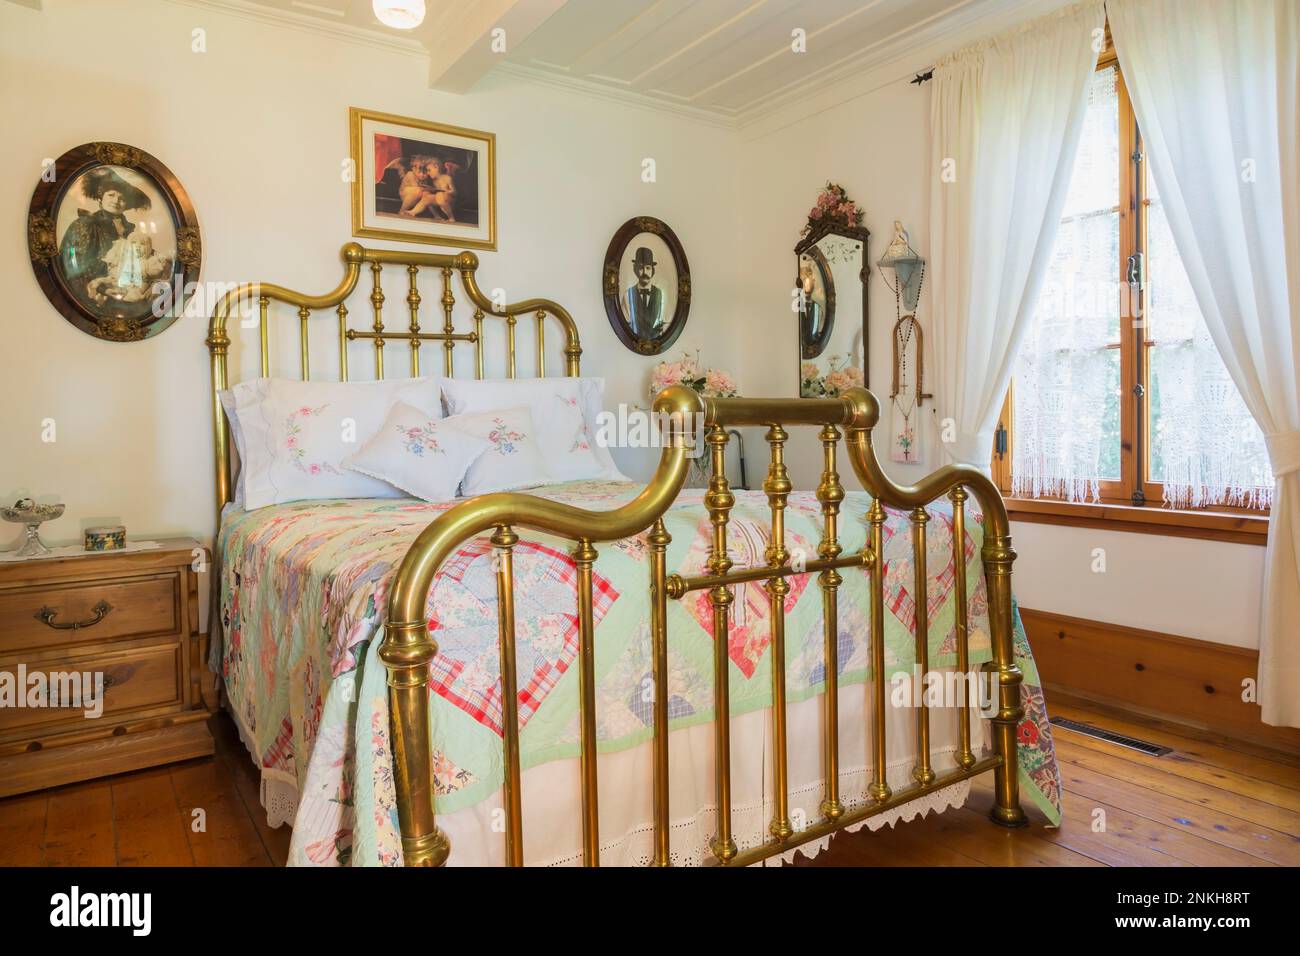 Double bed with antique brass headboard and footboard plus pine wood  nightstand in master bedroom inside old circa 1840 home Stock Photo - Alamy